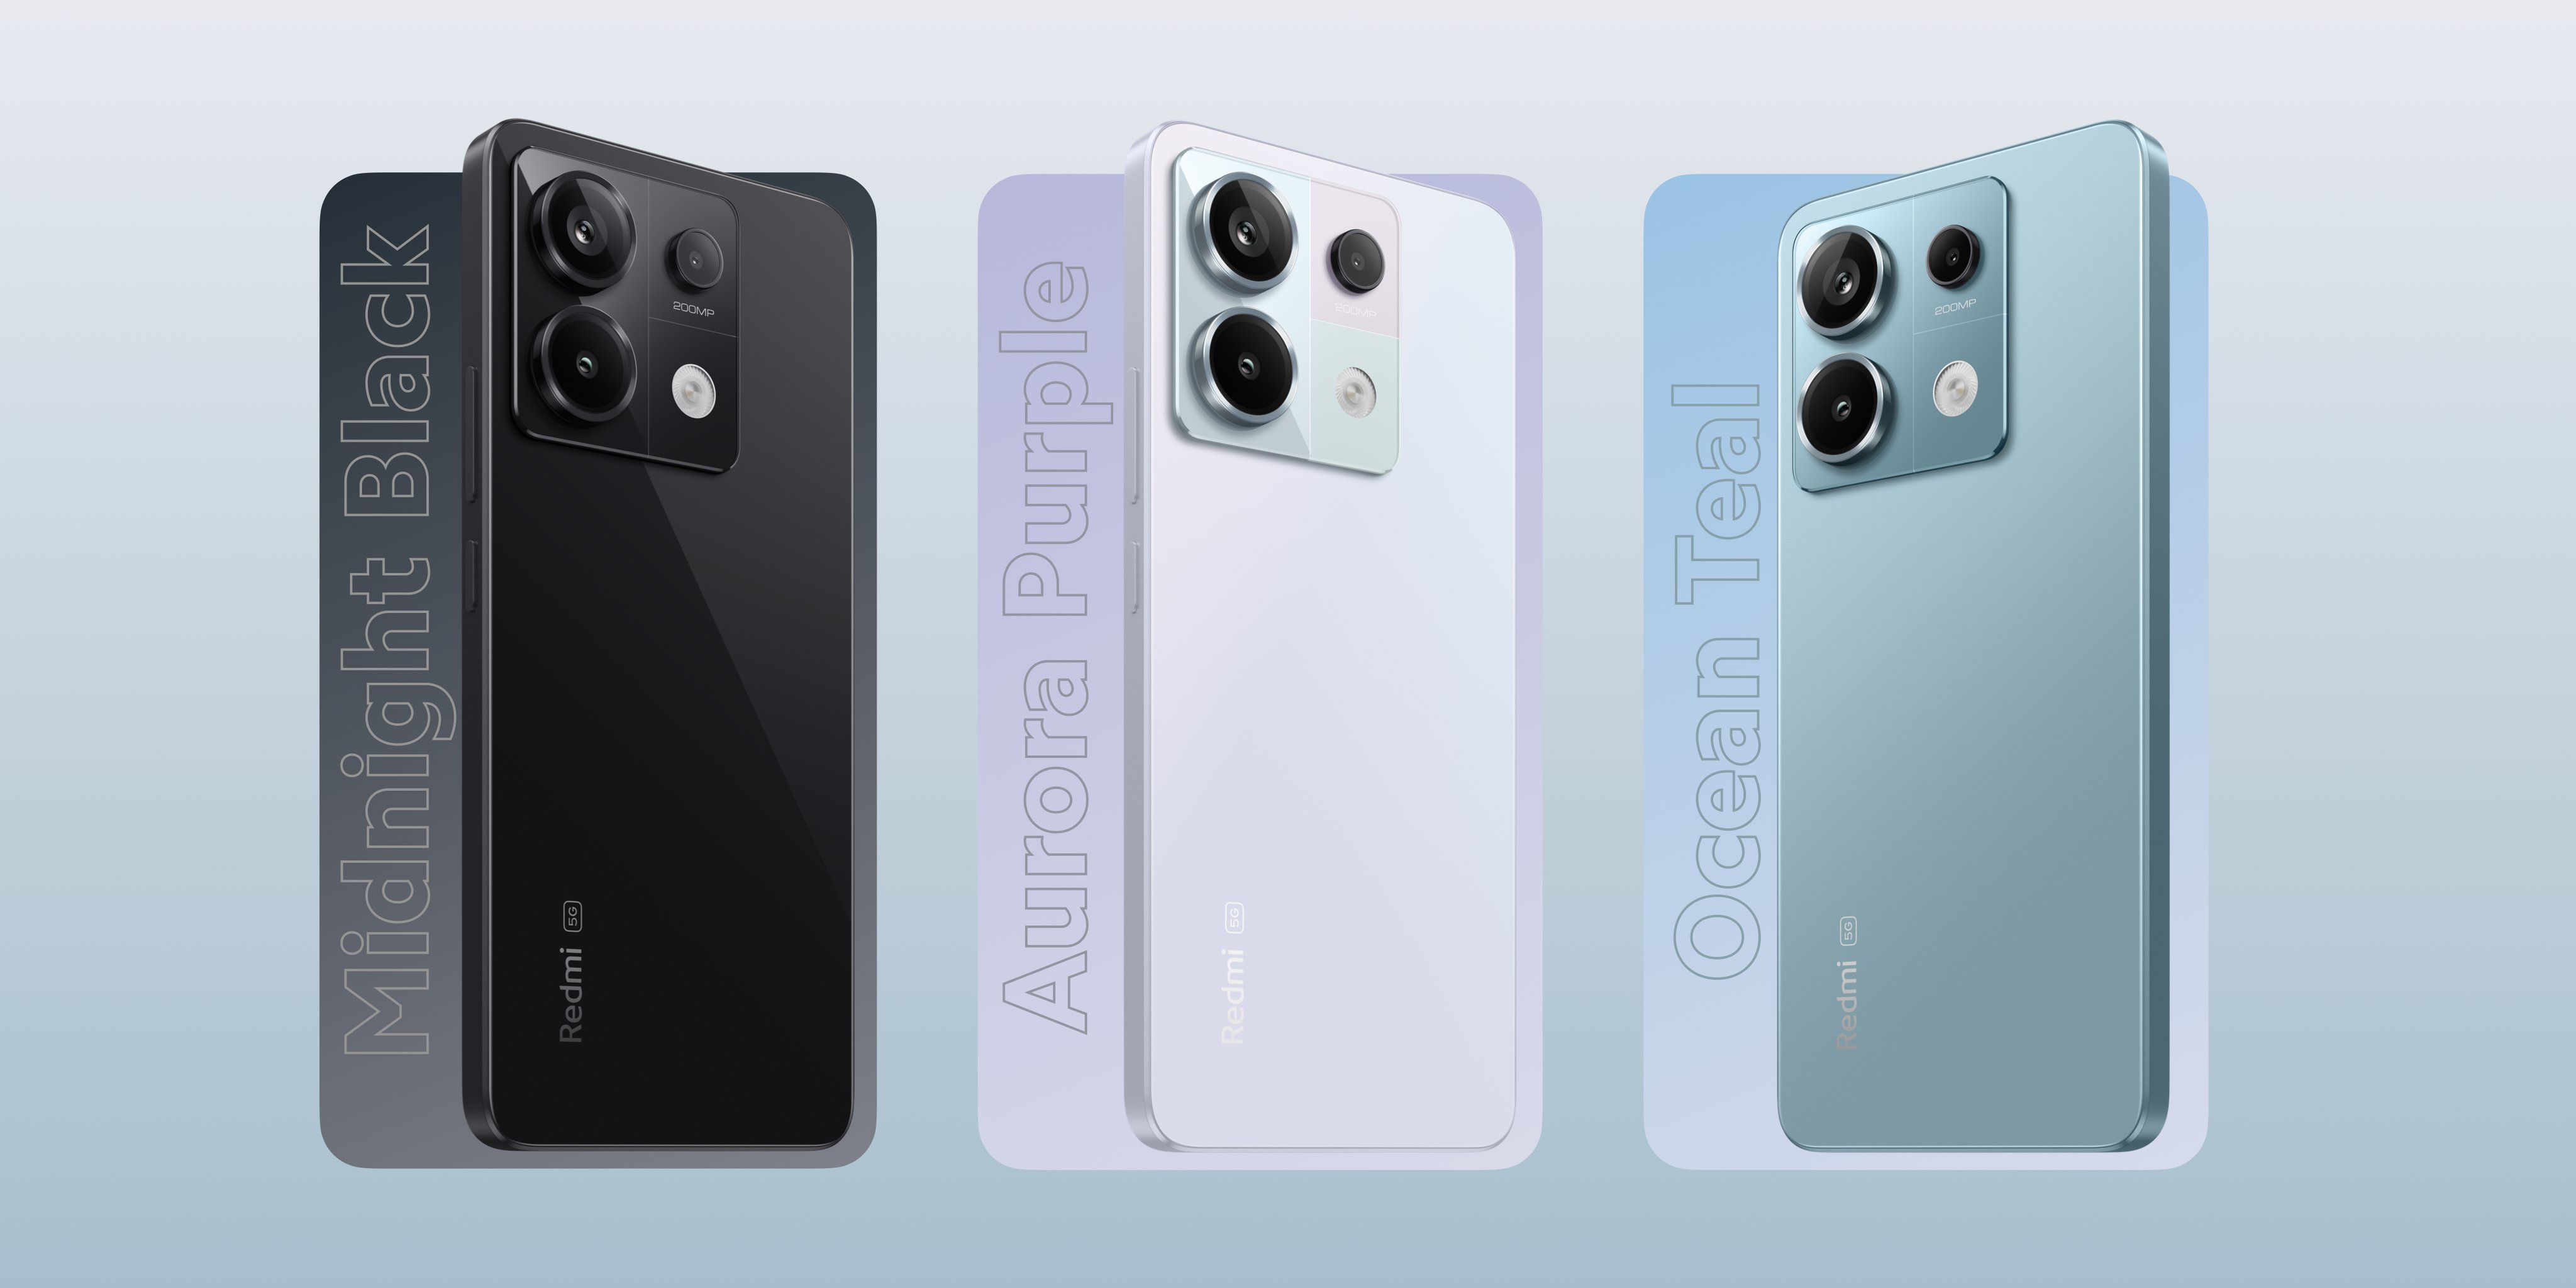 Redmi Note 13 Pro debuted in Europe: smartphone with Snapdragon 7s Gen 2 chip and 200 MP camera for 390 euros